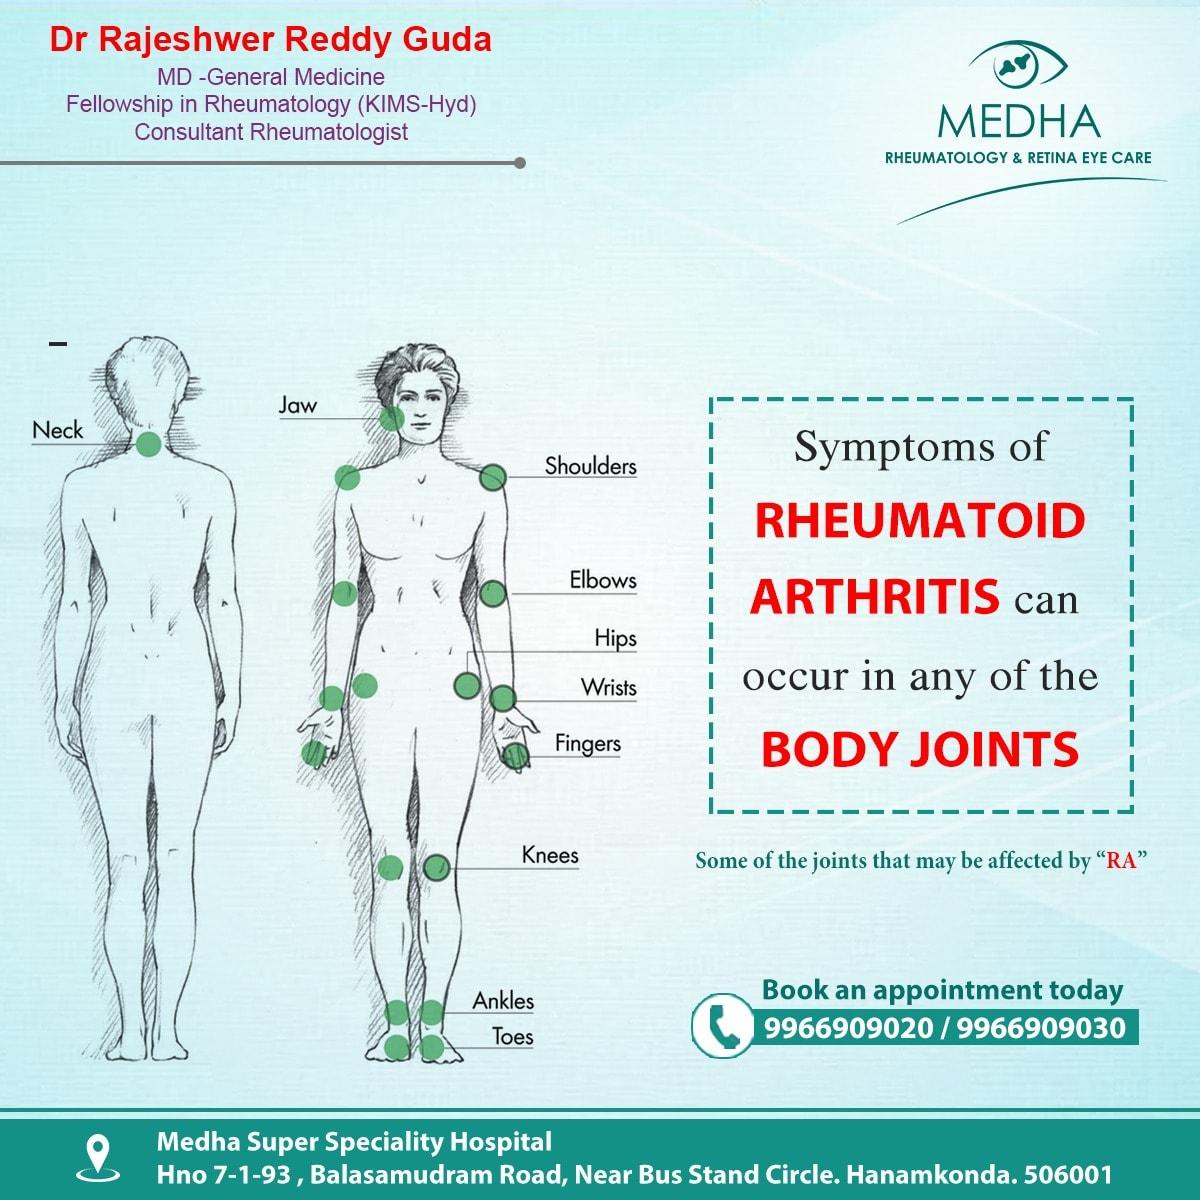 Symptoms of RHEUMATOID ARTHRITIS can occur in any part of the BODY JOINTS